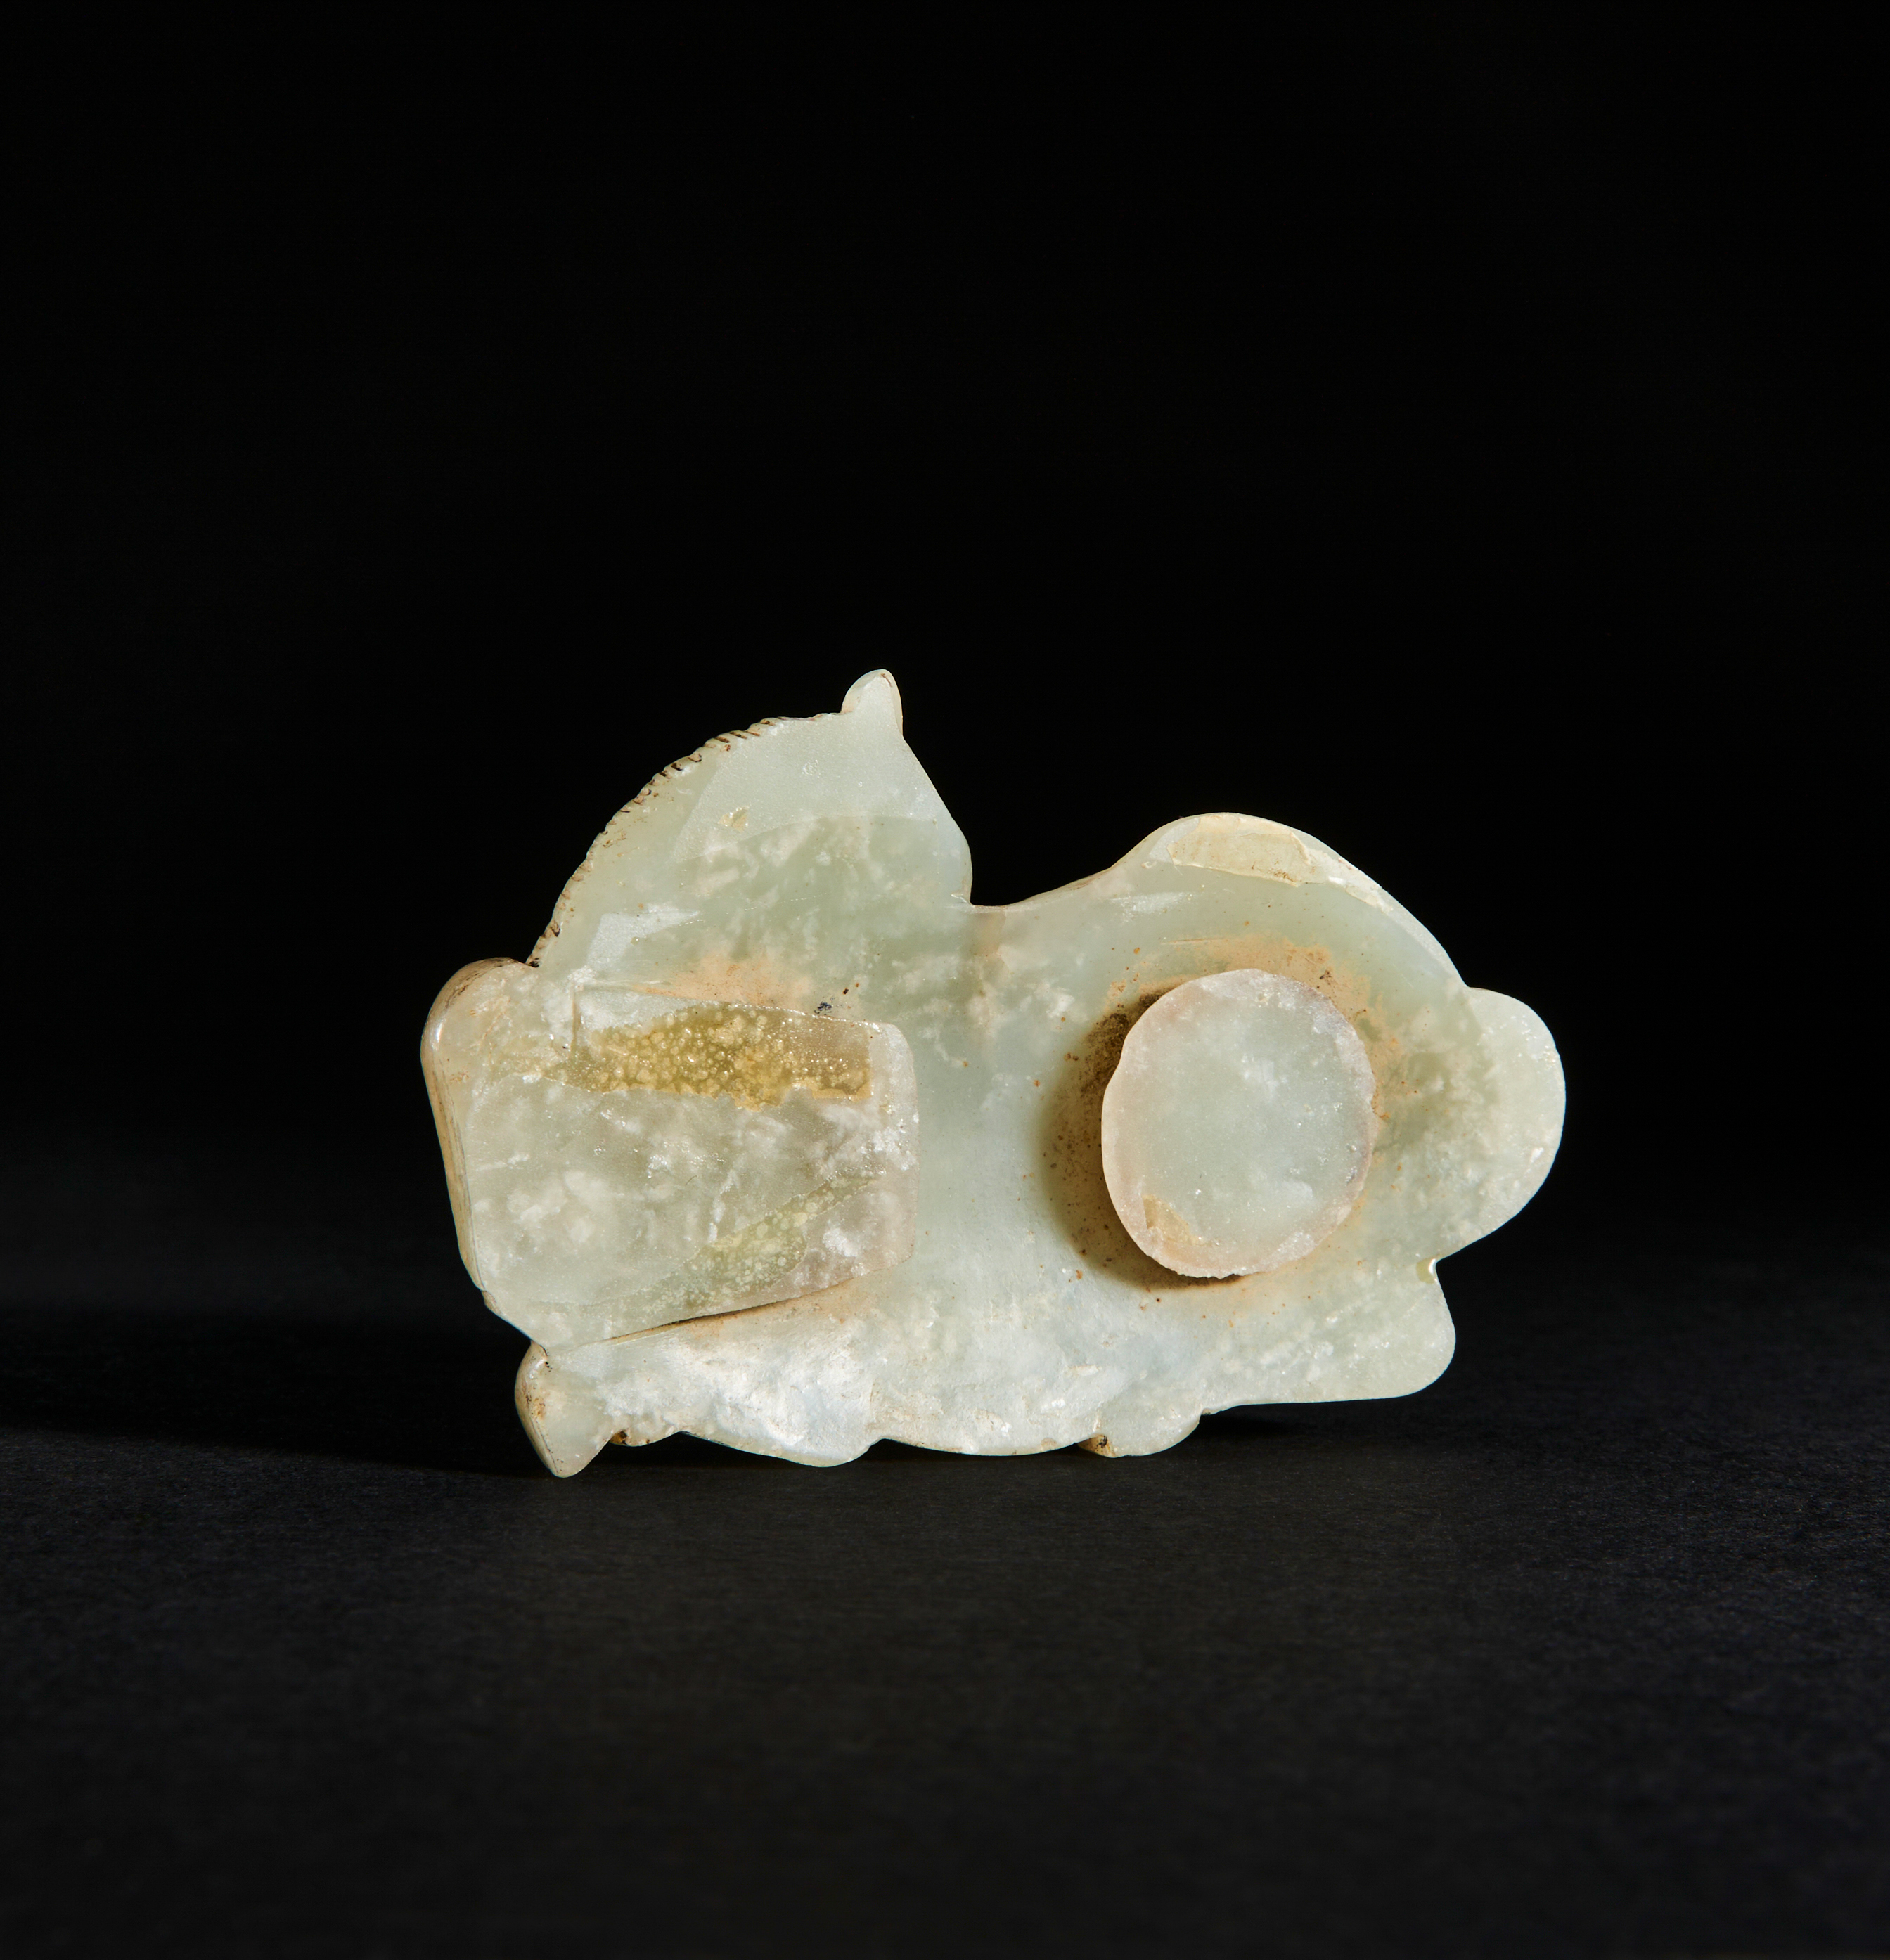 A CHINESE JADE BELT HOOK OF A RECUMBENT HORSE, QING DYNASTY (1644-1911) - Image 2 of 2